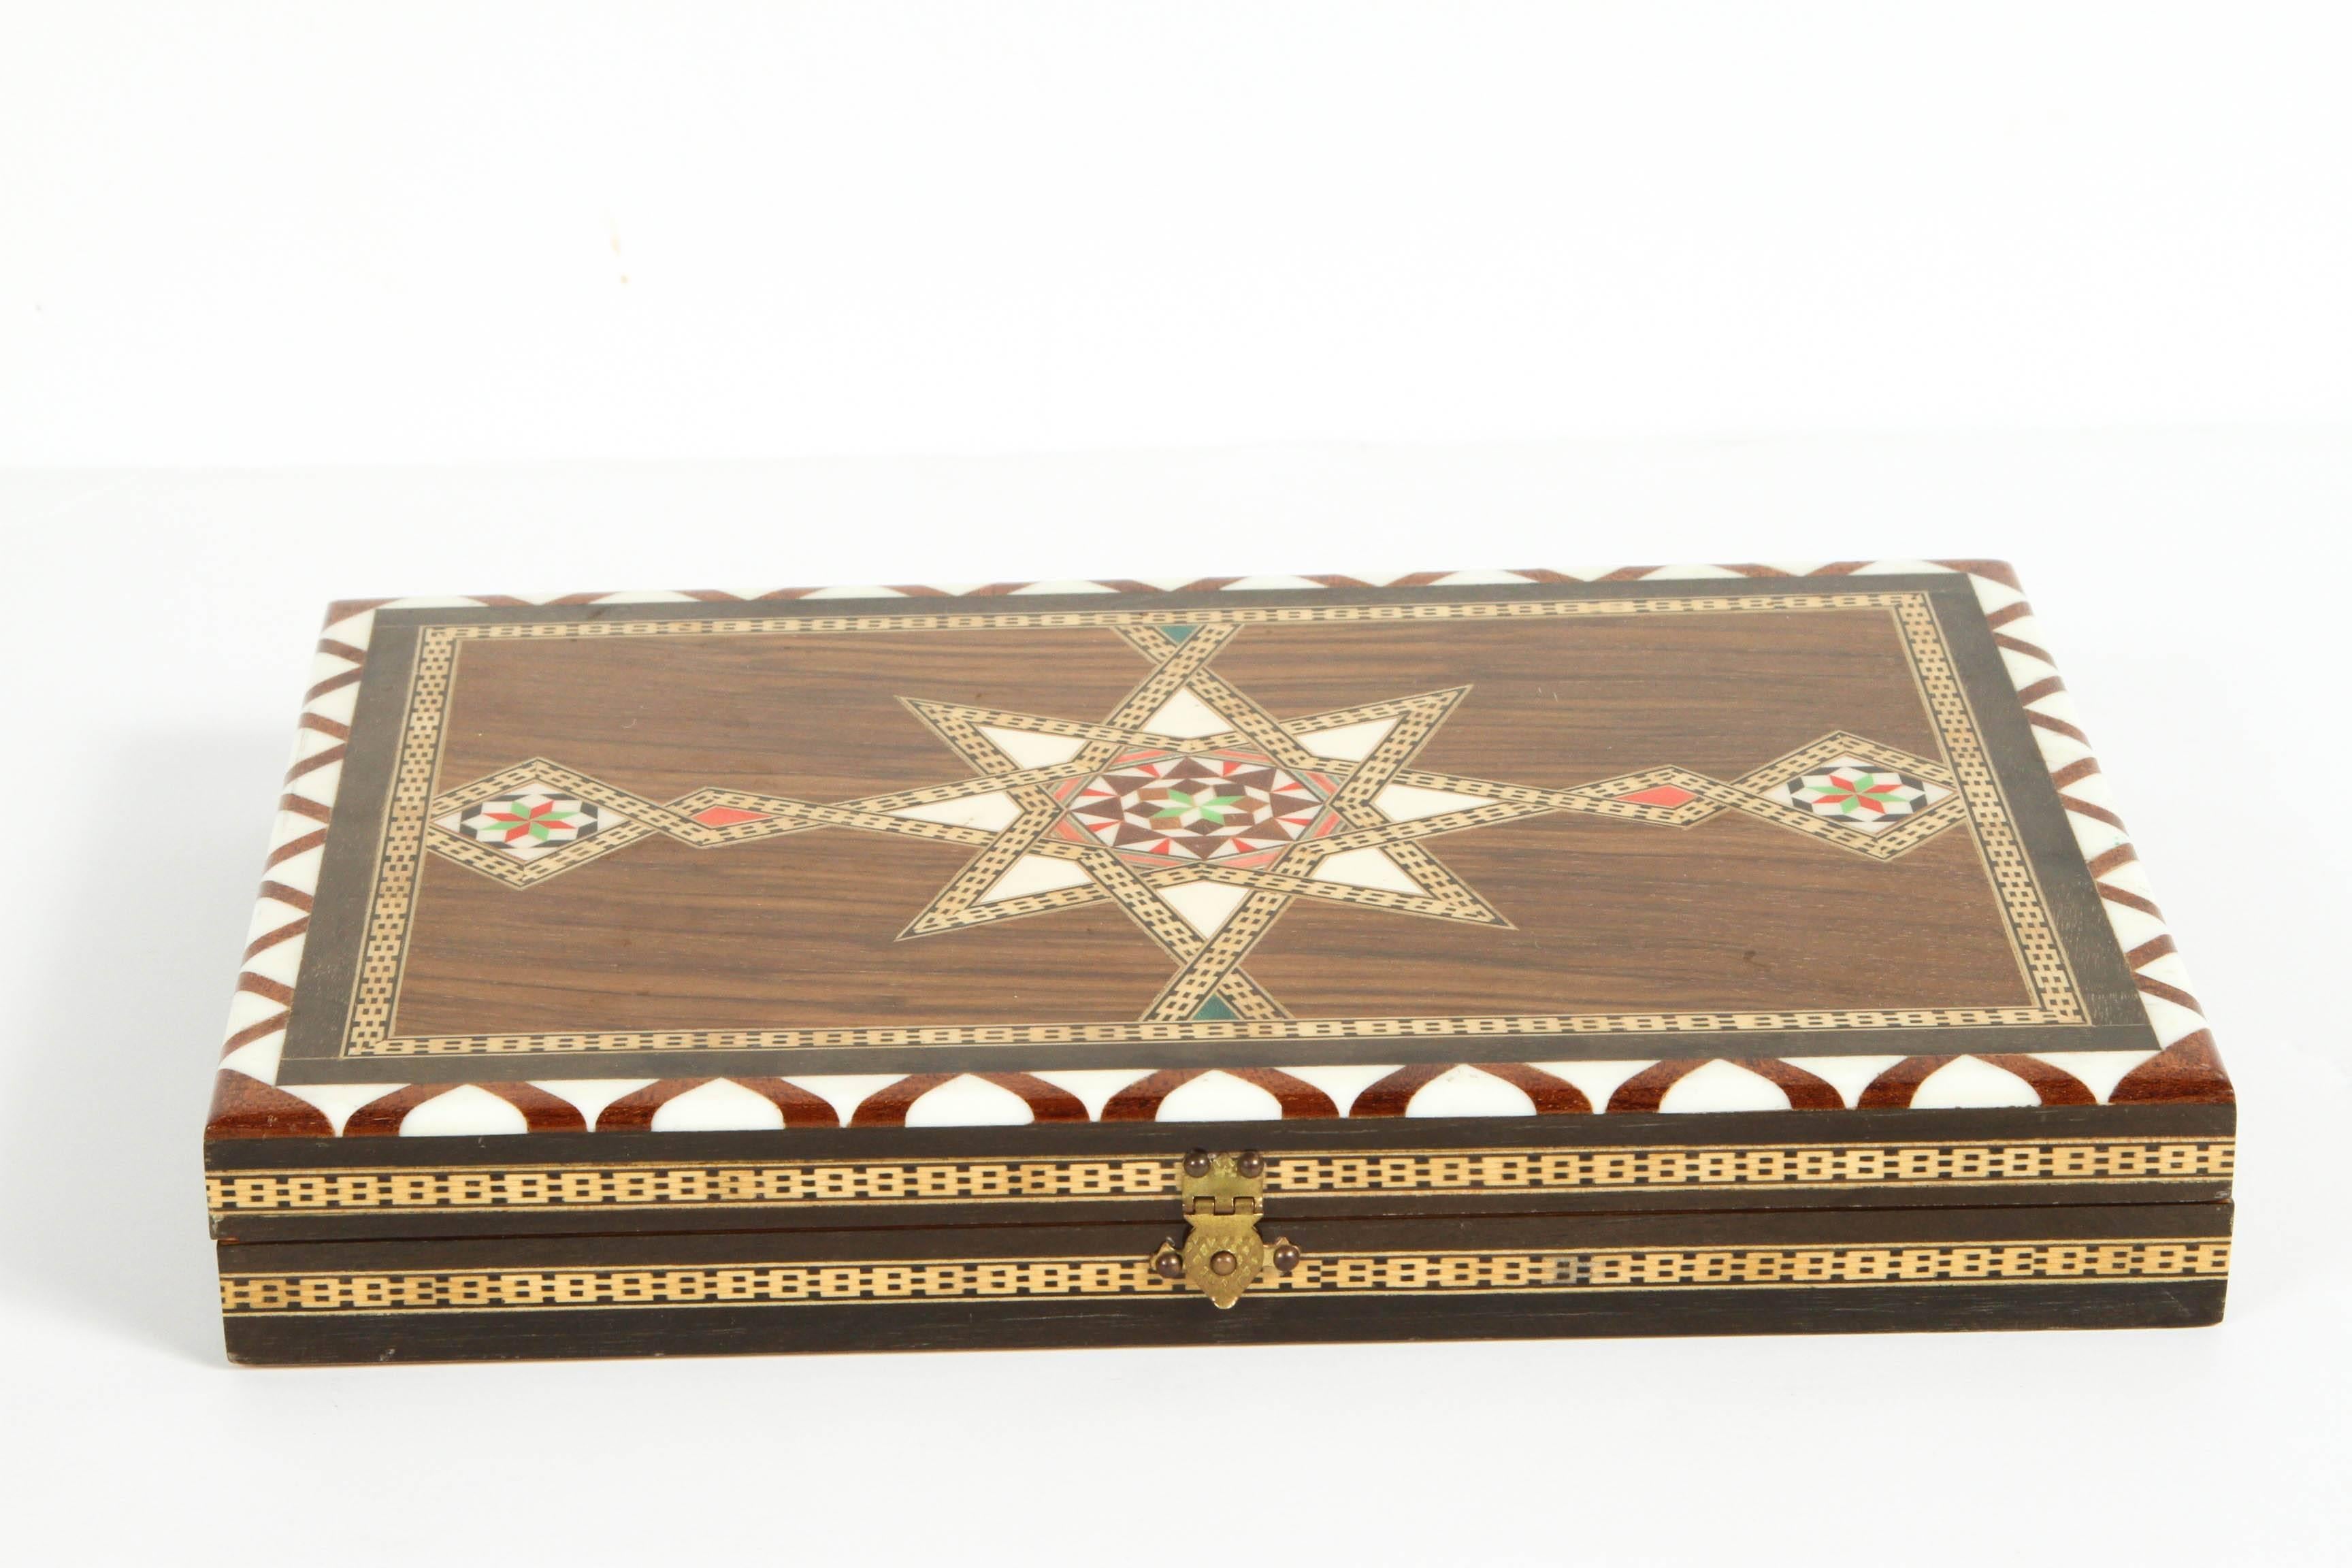 Middle Eastern Syrian inlaid mosaic backgammon game.
Great handcrafted inlaid  mosaic box with backgammon game with all the wooden dice and pieces.
 Size: Closed: 10